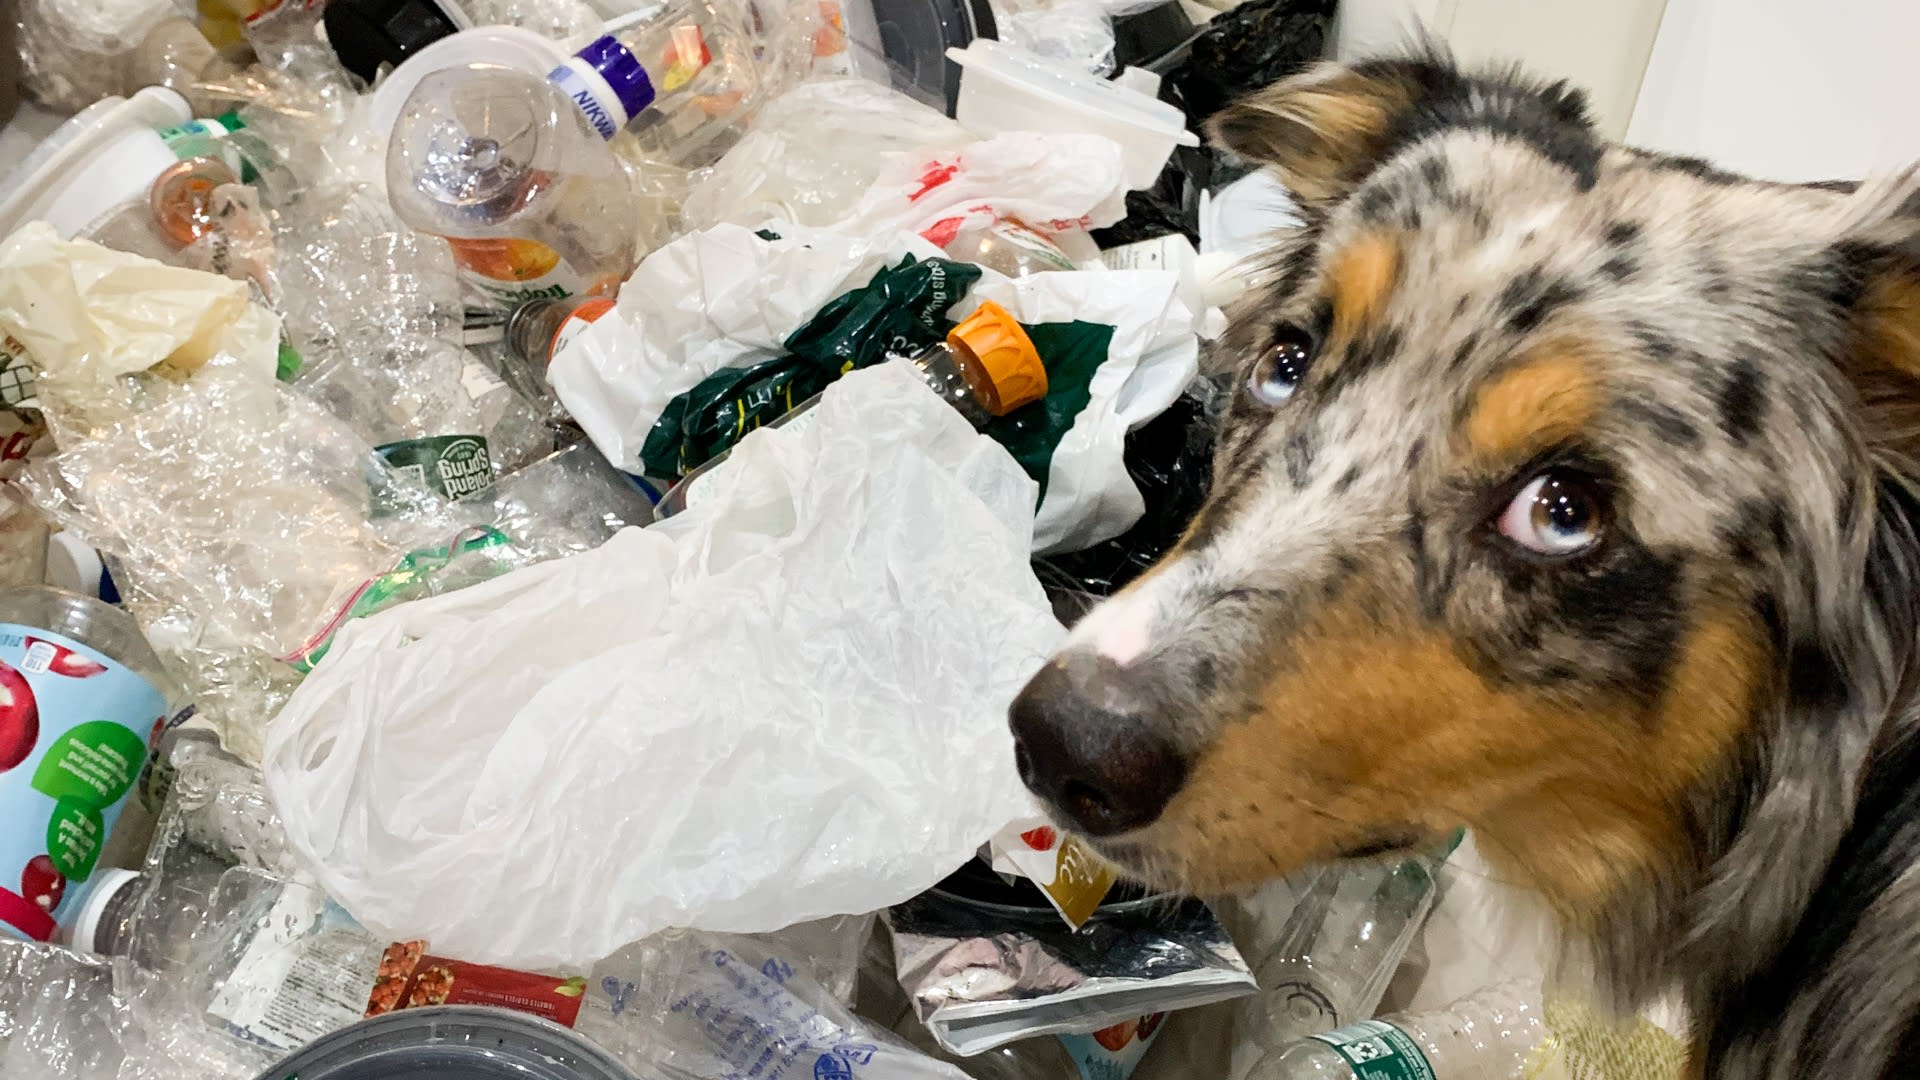 Photograph of a (very cute) dog looking back towards the camera in the foreground. In the background are hundreds of pieces of single-use plastic strewn about the floor.